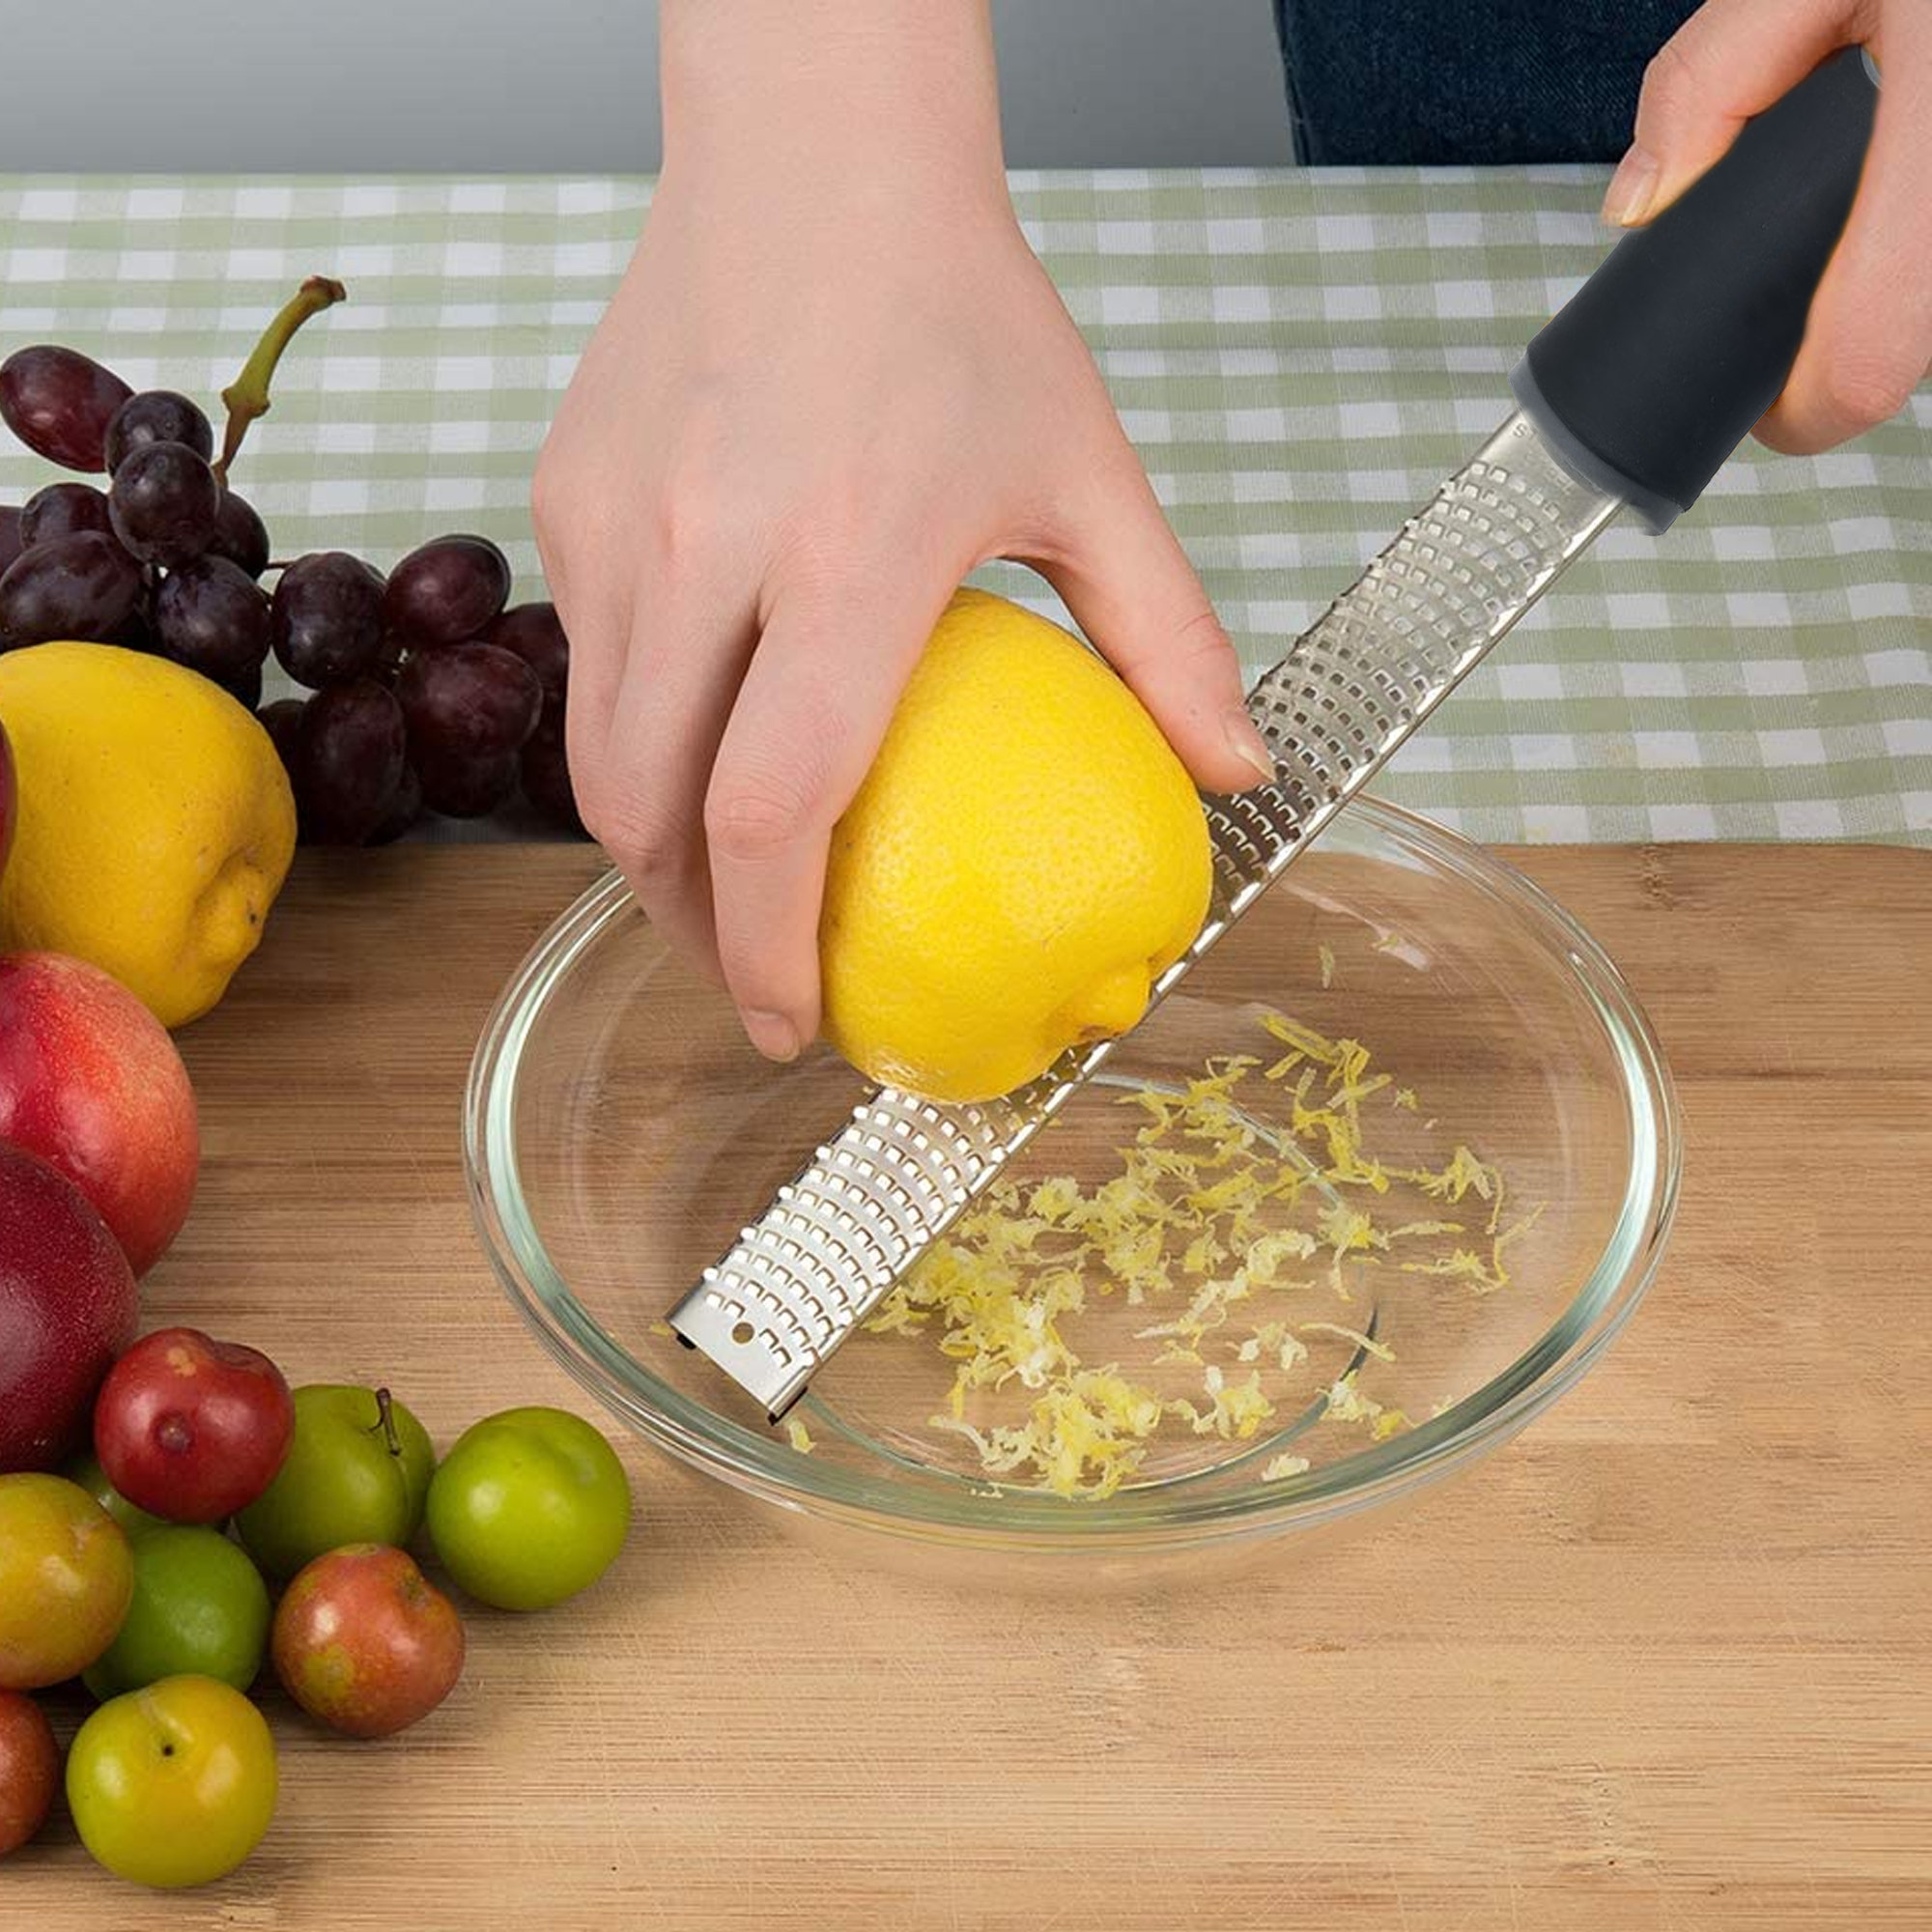 Stainless Steel Cheese Grater, Shredder with Handle, Garlic Mincer Tool and Vegetable Peeler